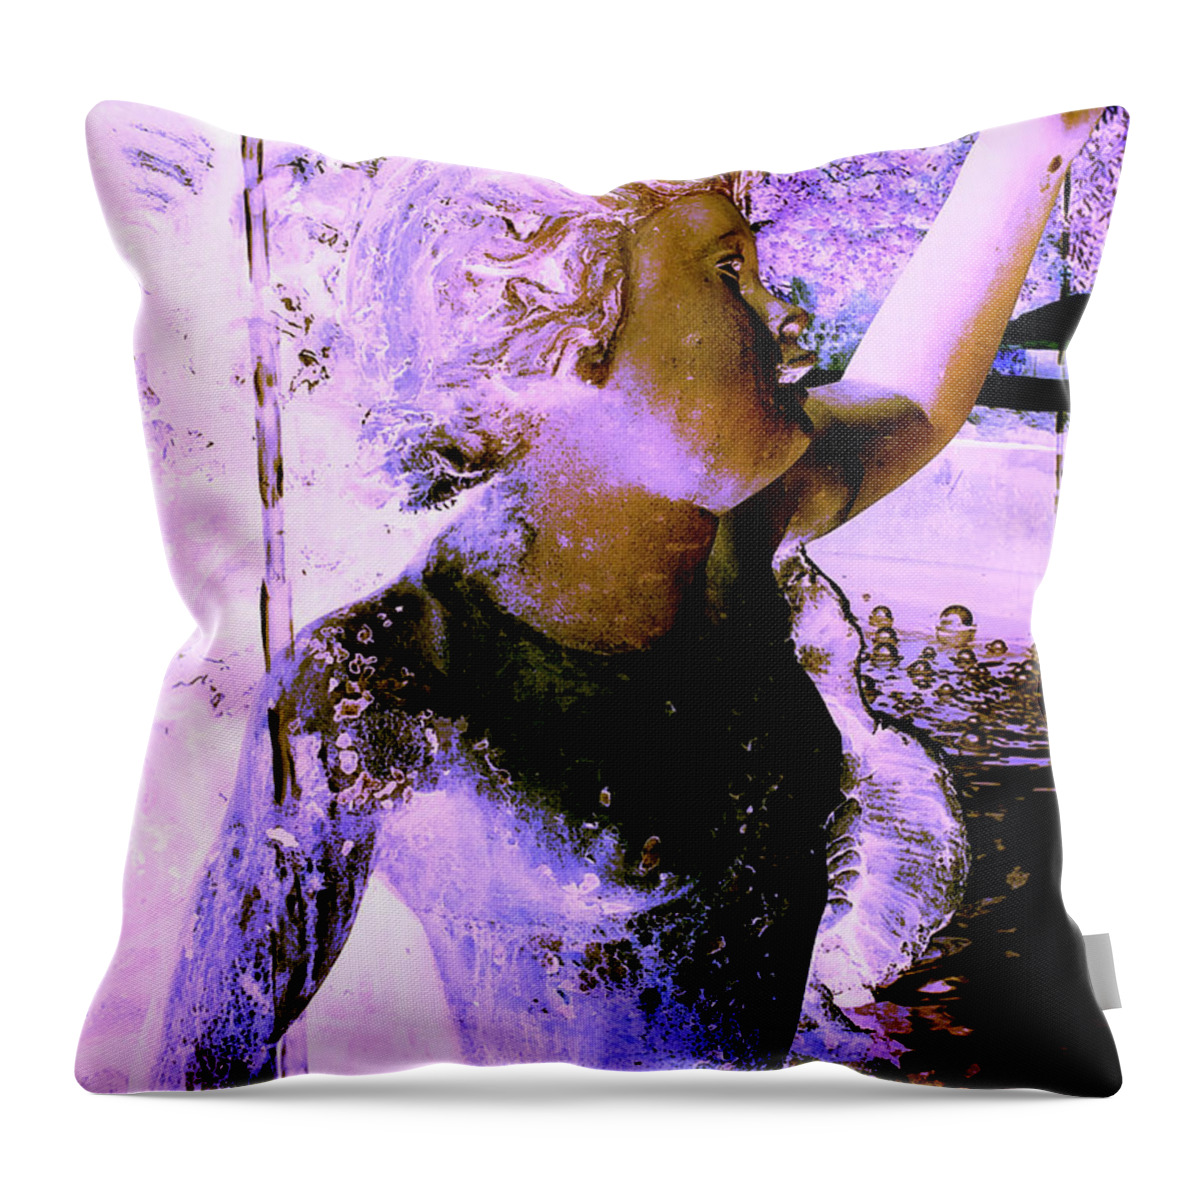 Water Throw Pillow featuring the mixed media Cupid by Giorgio Tuscani